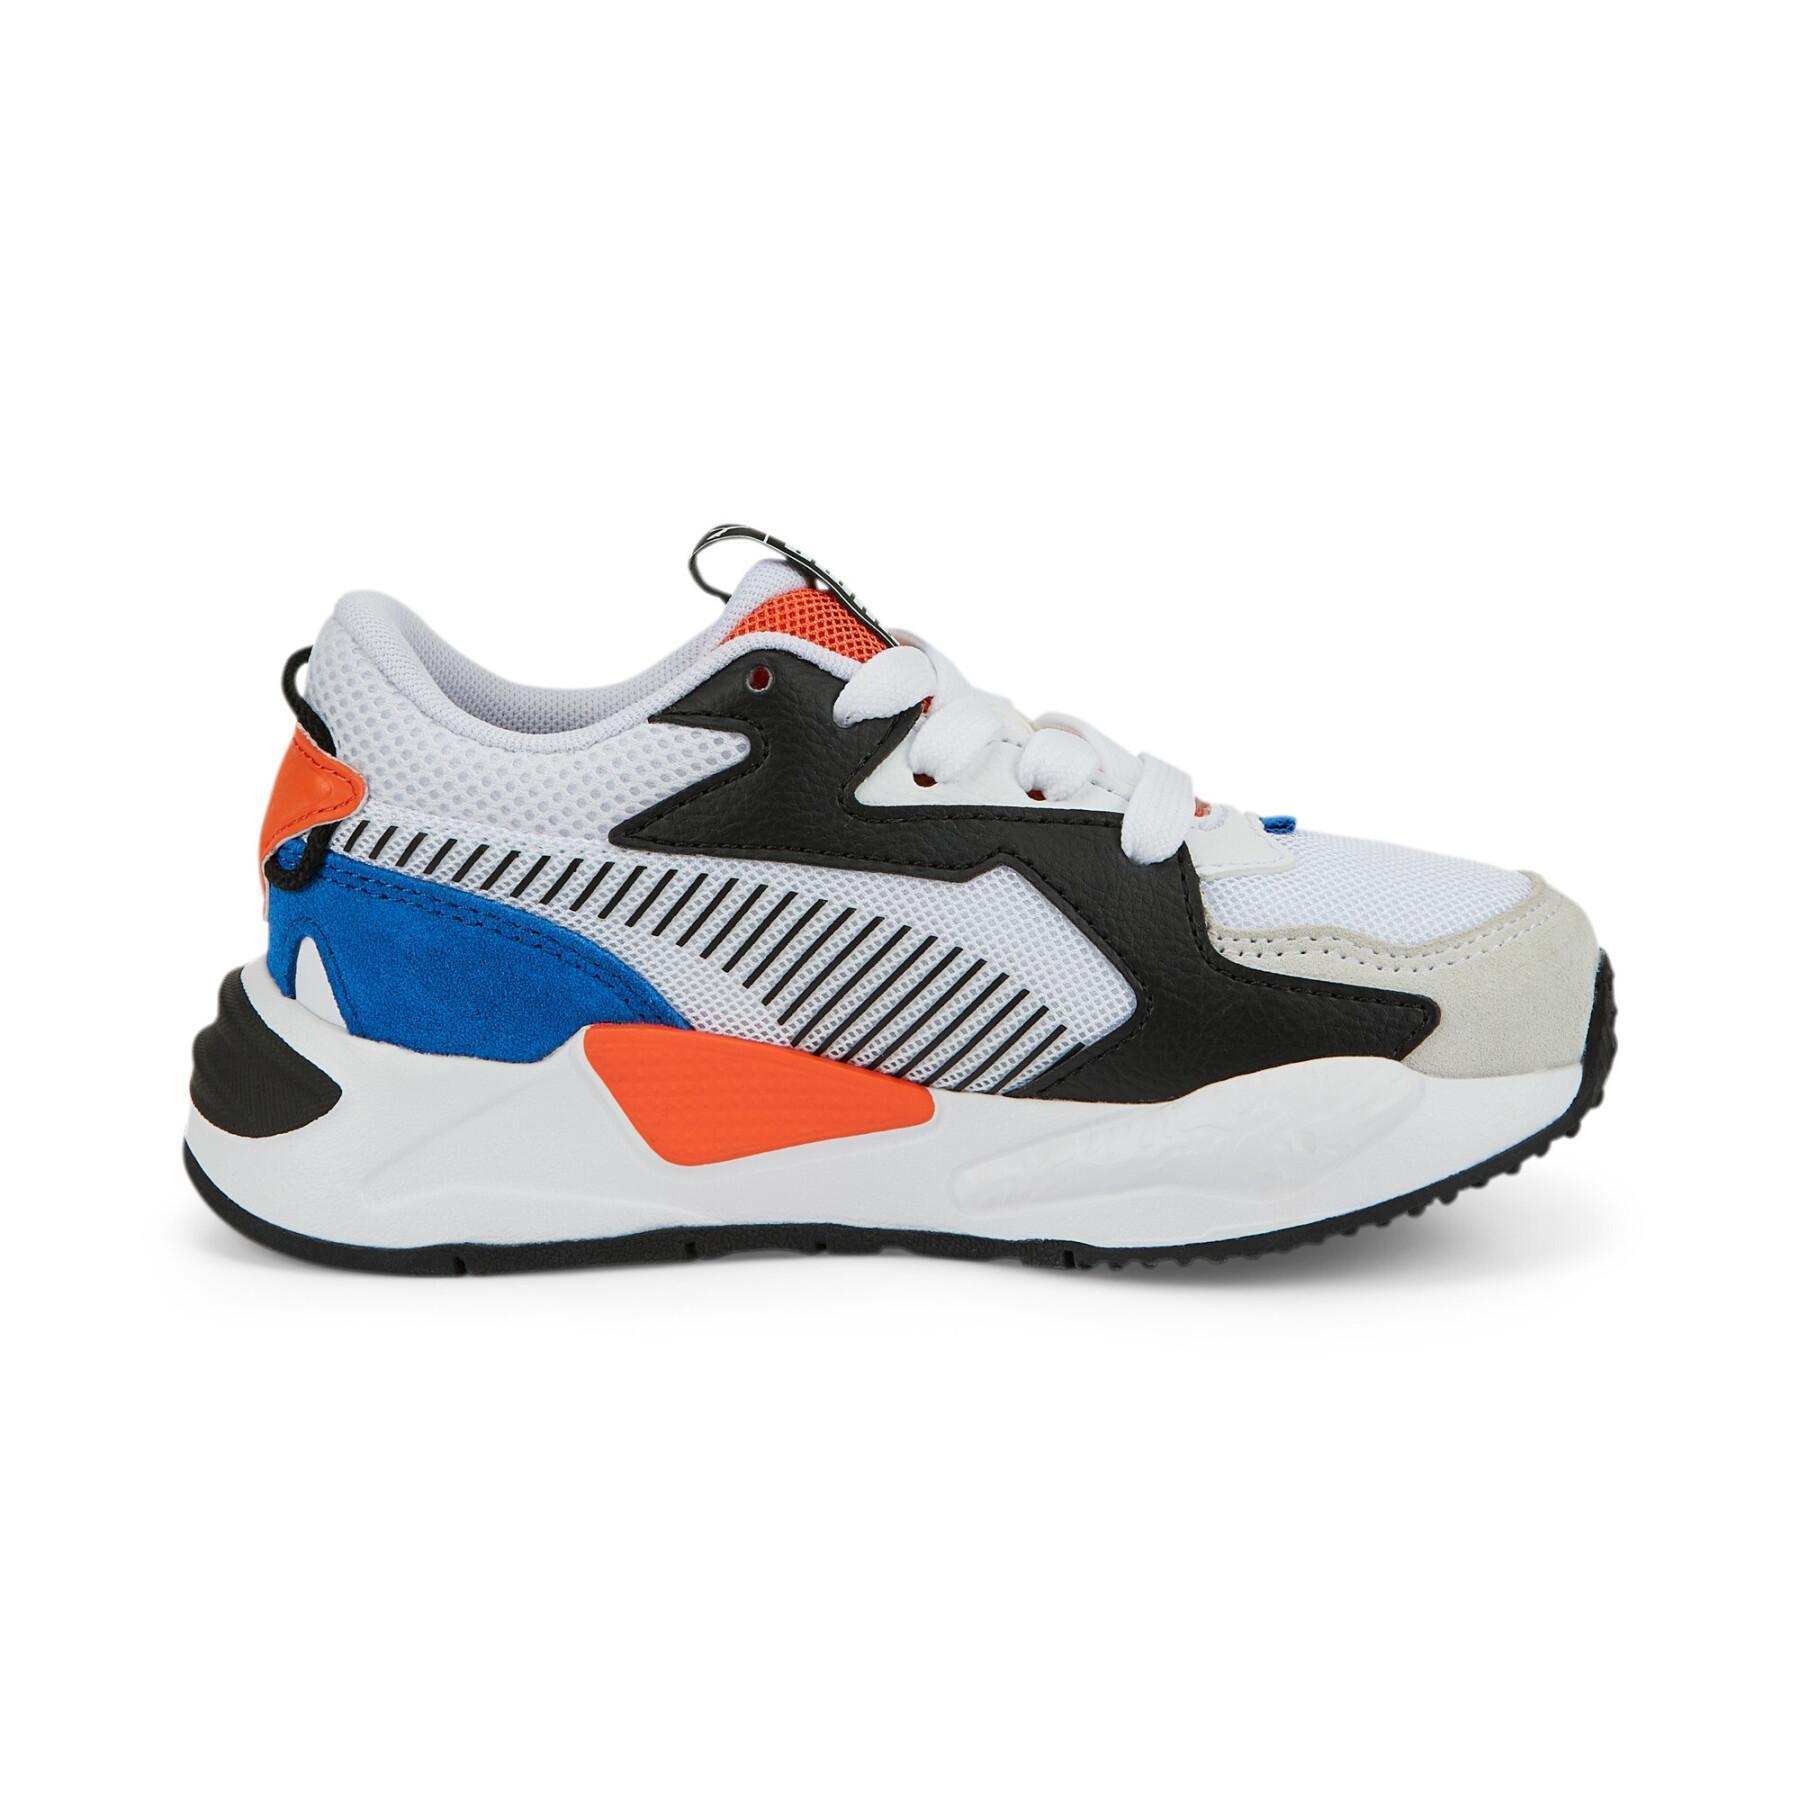 Children's sneakers Puma RS-Z Top PS